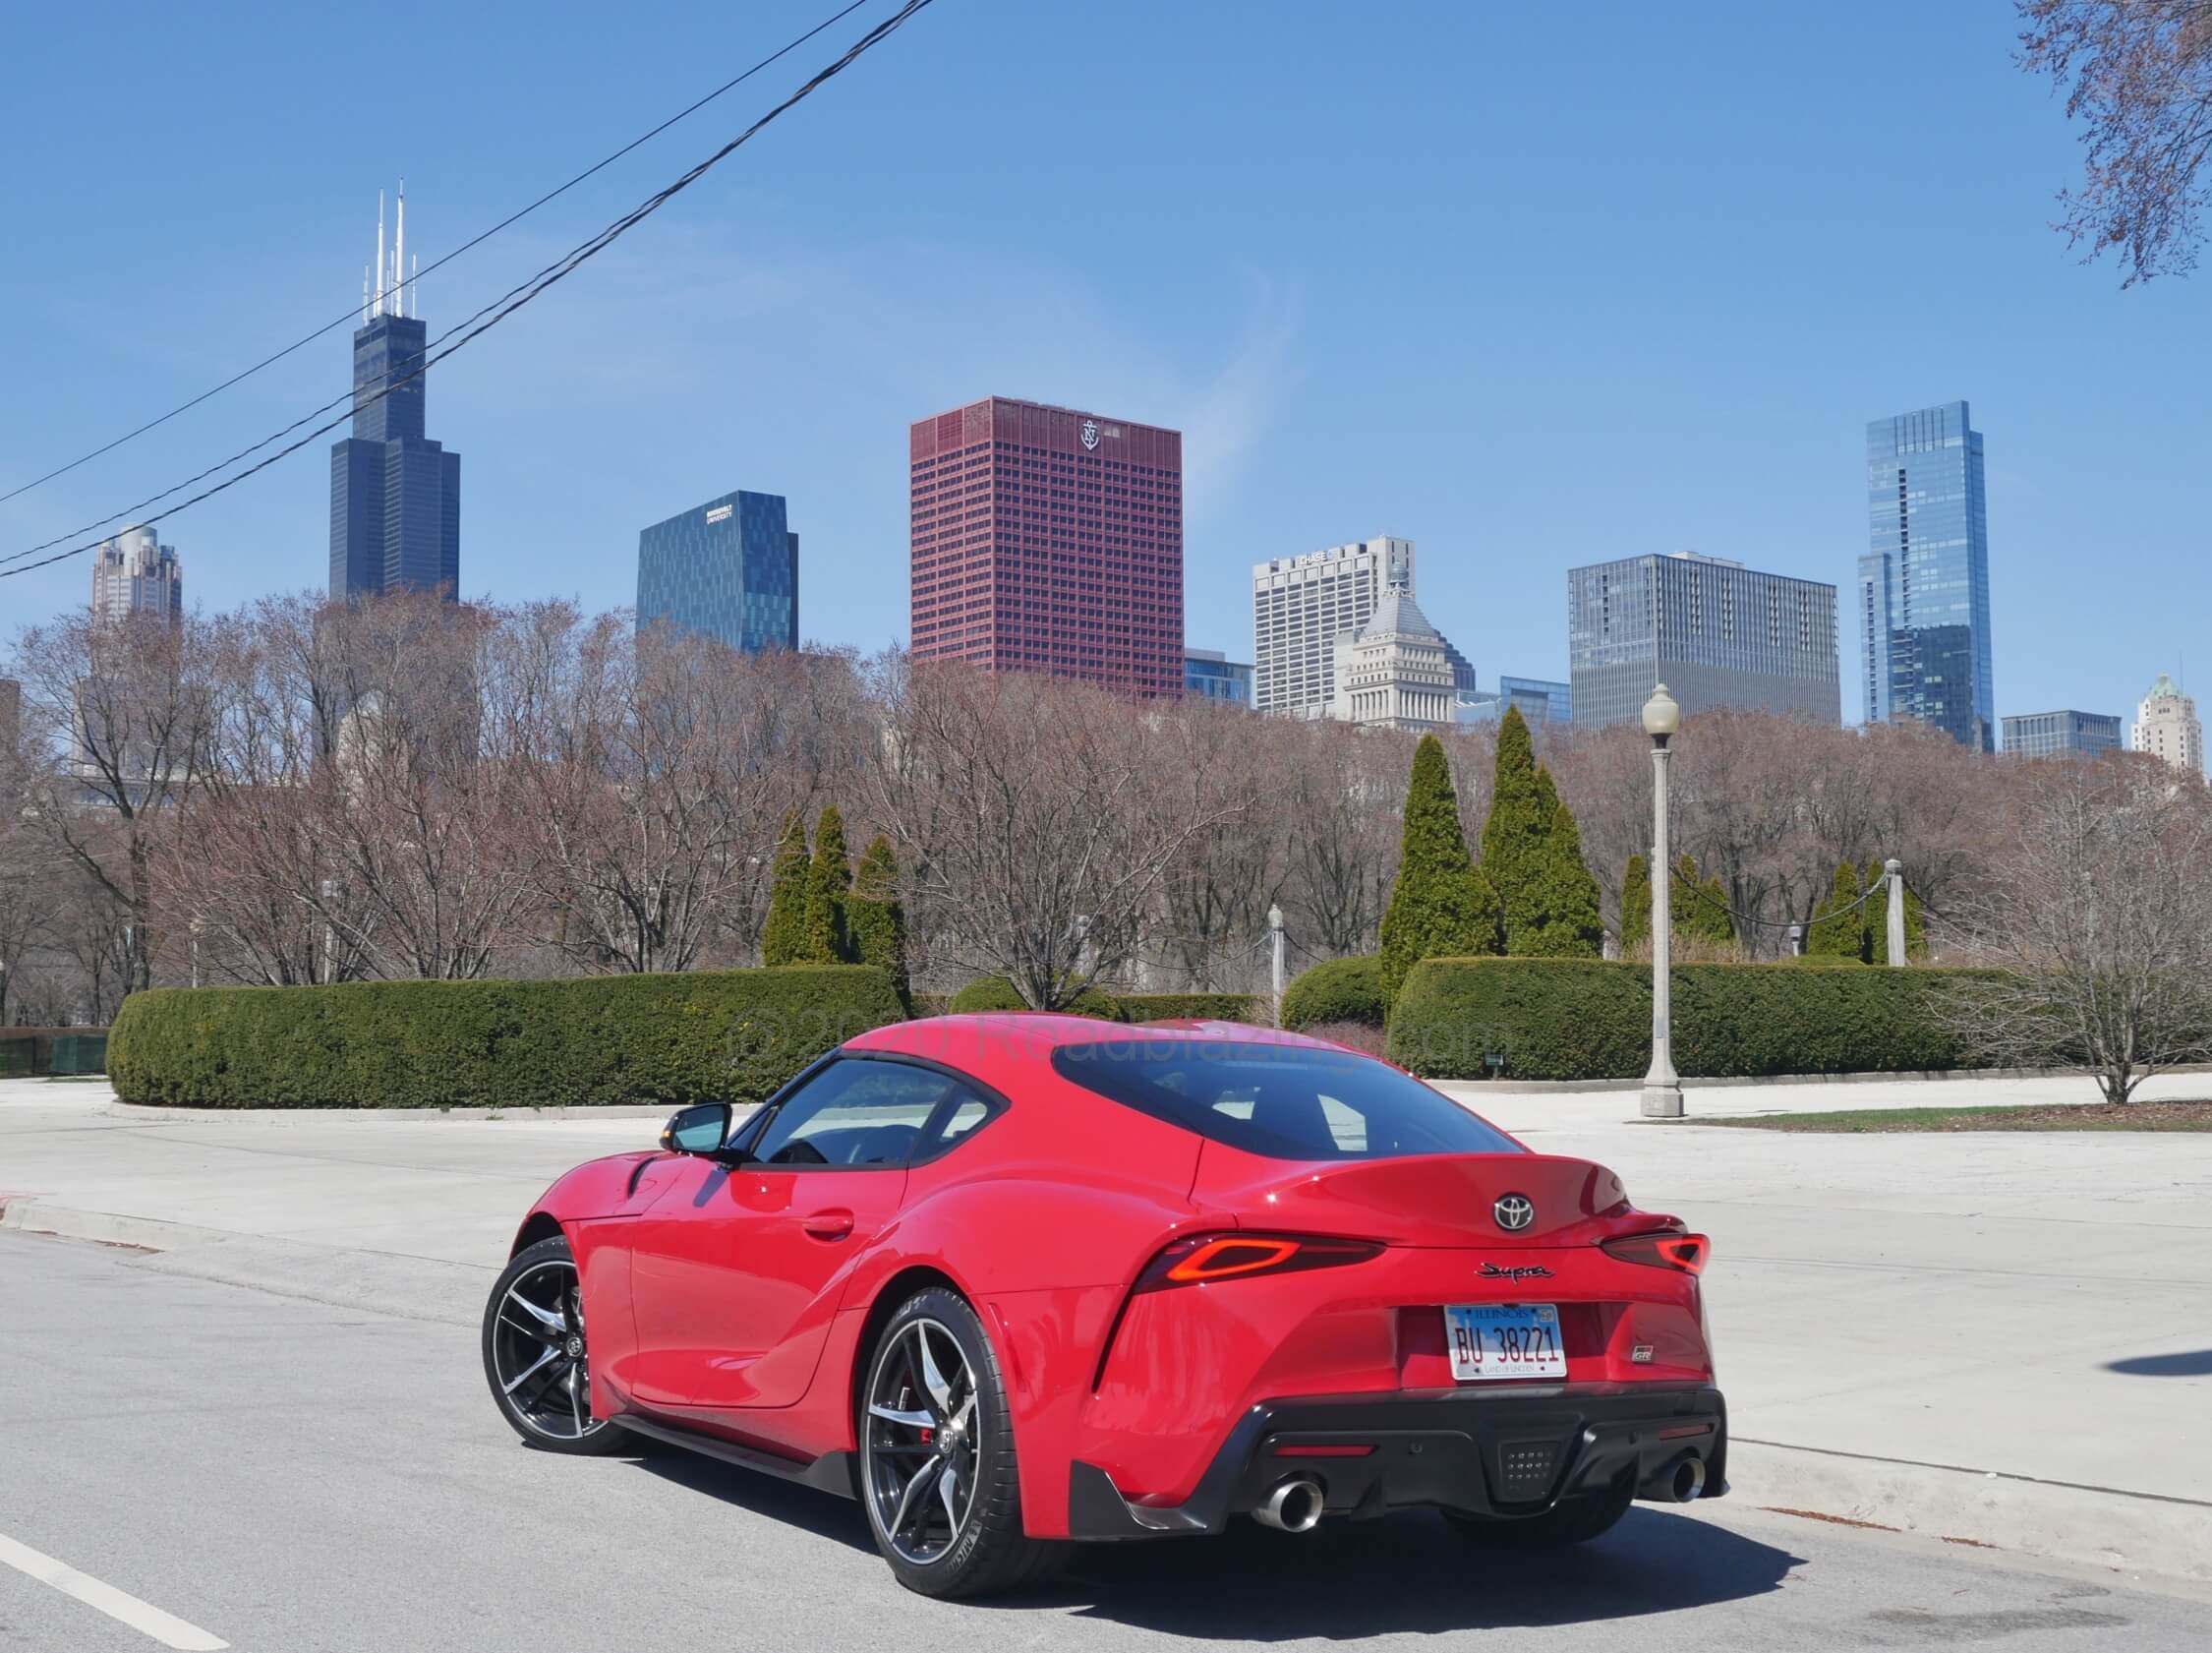 2020 Toyota Supra GR 3.0T Premium: at desolate Chicago Millennium Park during start of COVID-19 home sheltering